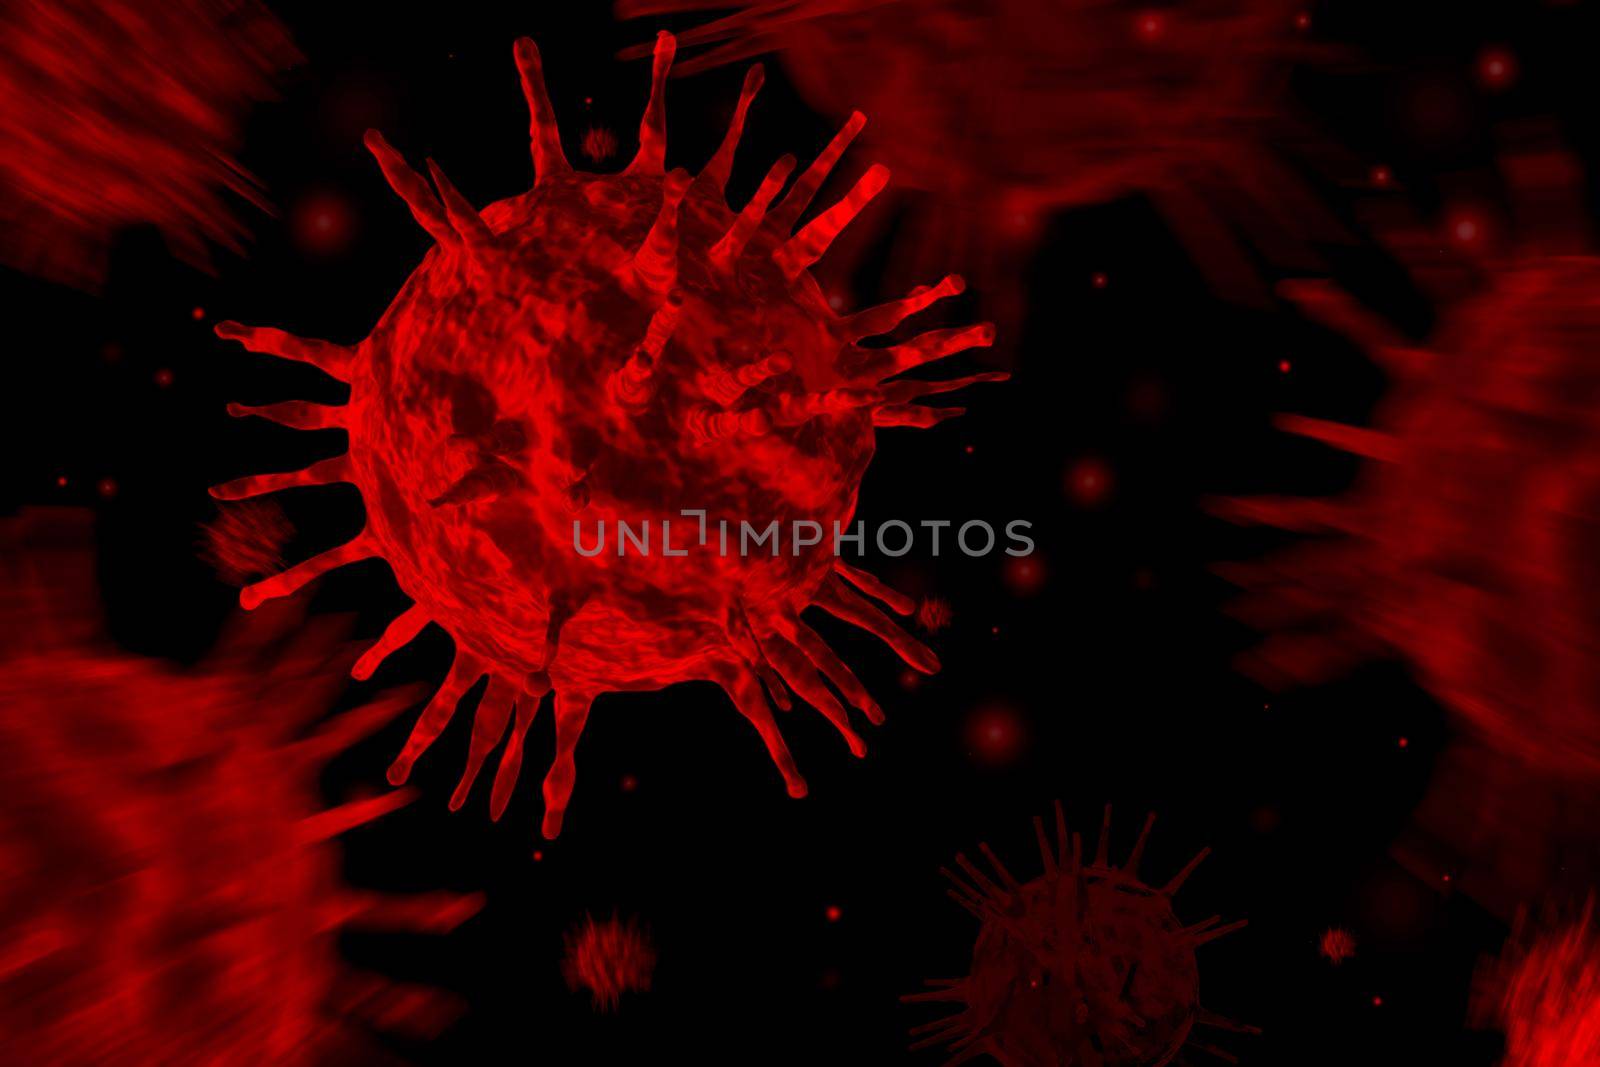 RED coronavirus COVID-19 under the microscope isolated on red blurred virus background , 3d illustration .